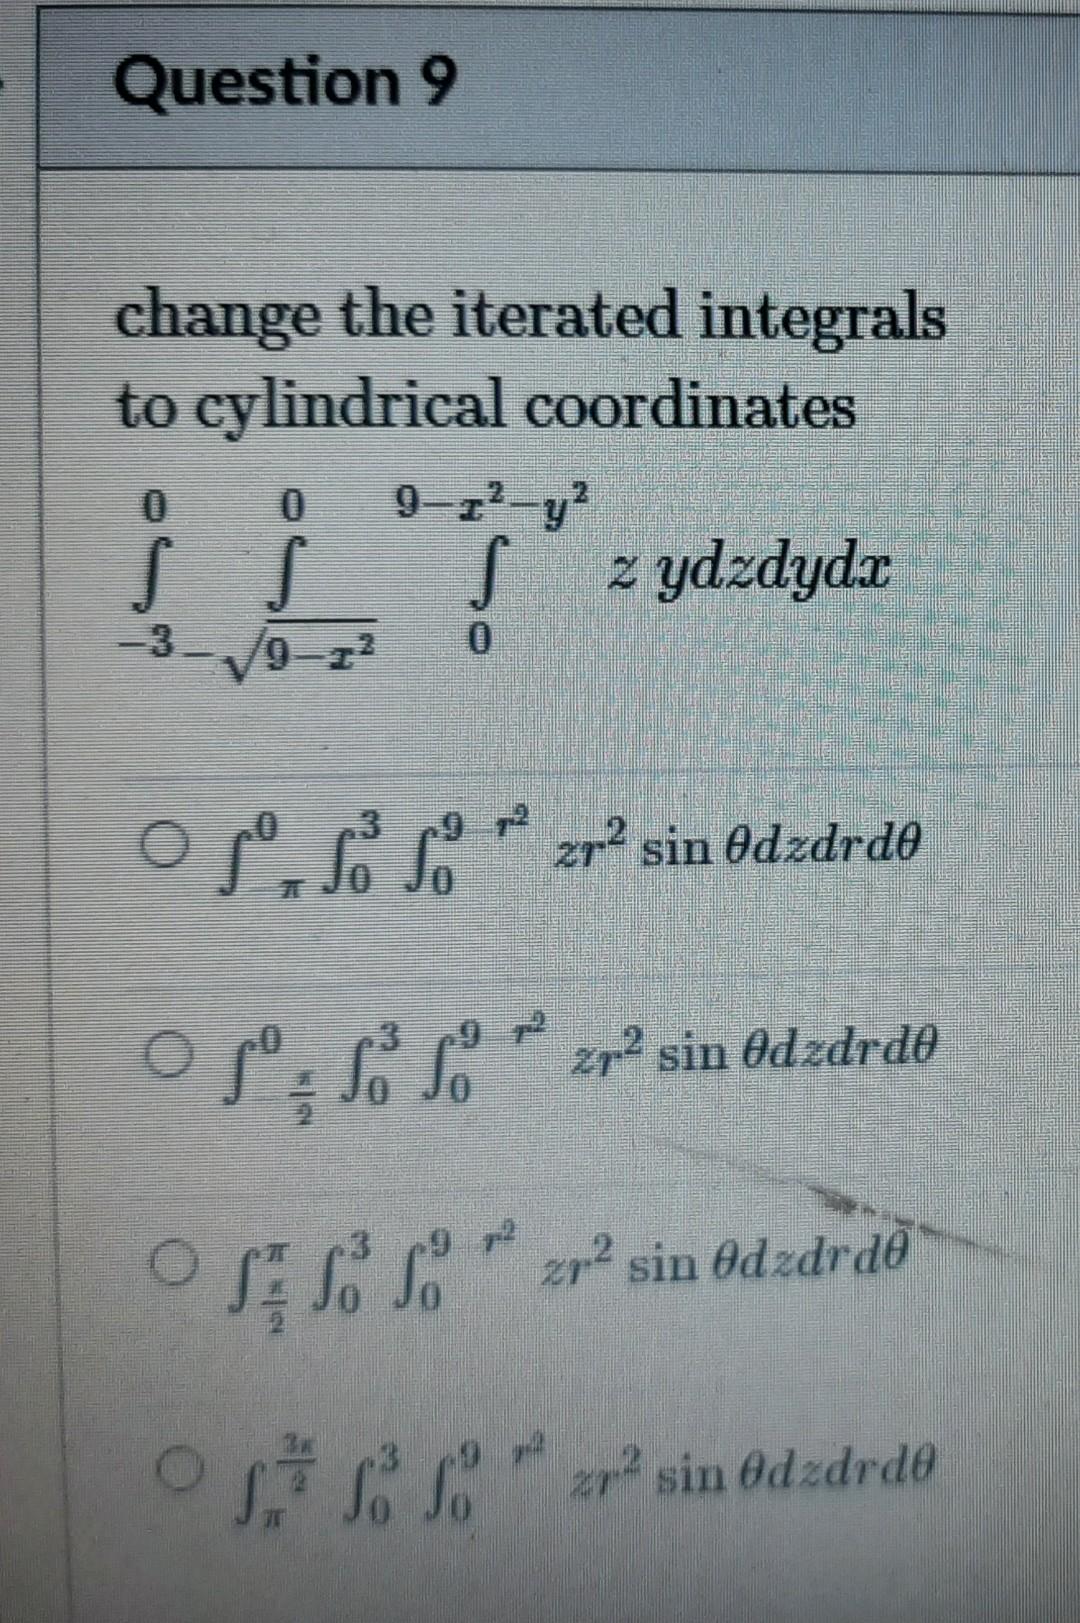 Question 9 Change The Iterated Integrals To Cylindrical Coordinates 9 22 Y Ss Z Ydzdyd 9 2 O I 0 Ols So Zr Sin Odzd 1